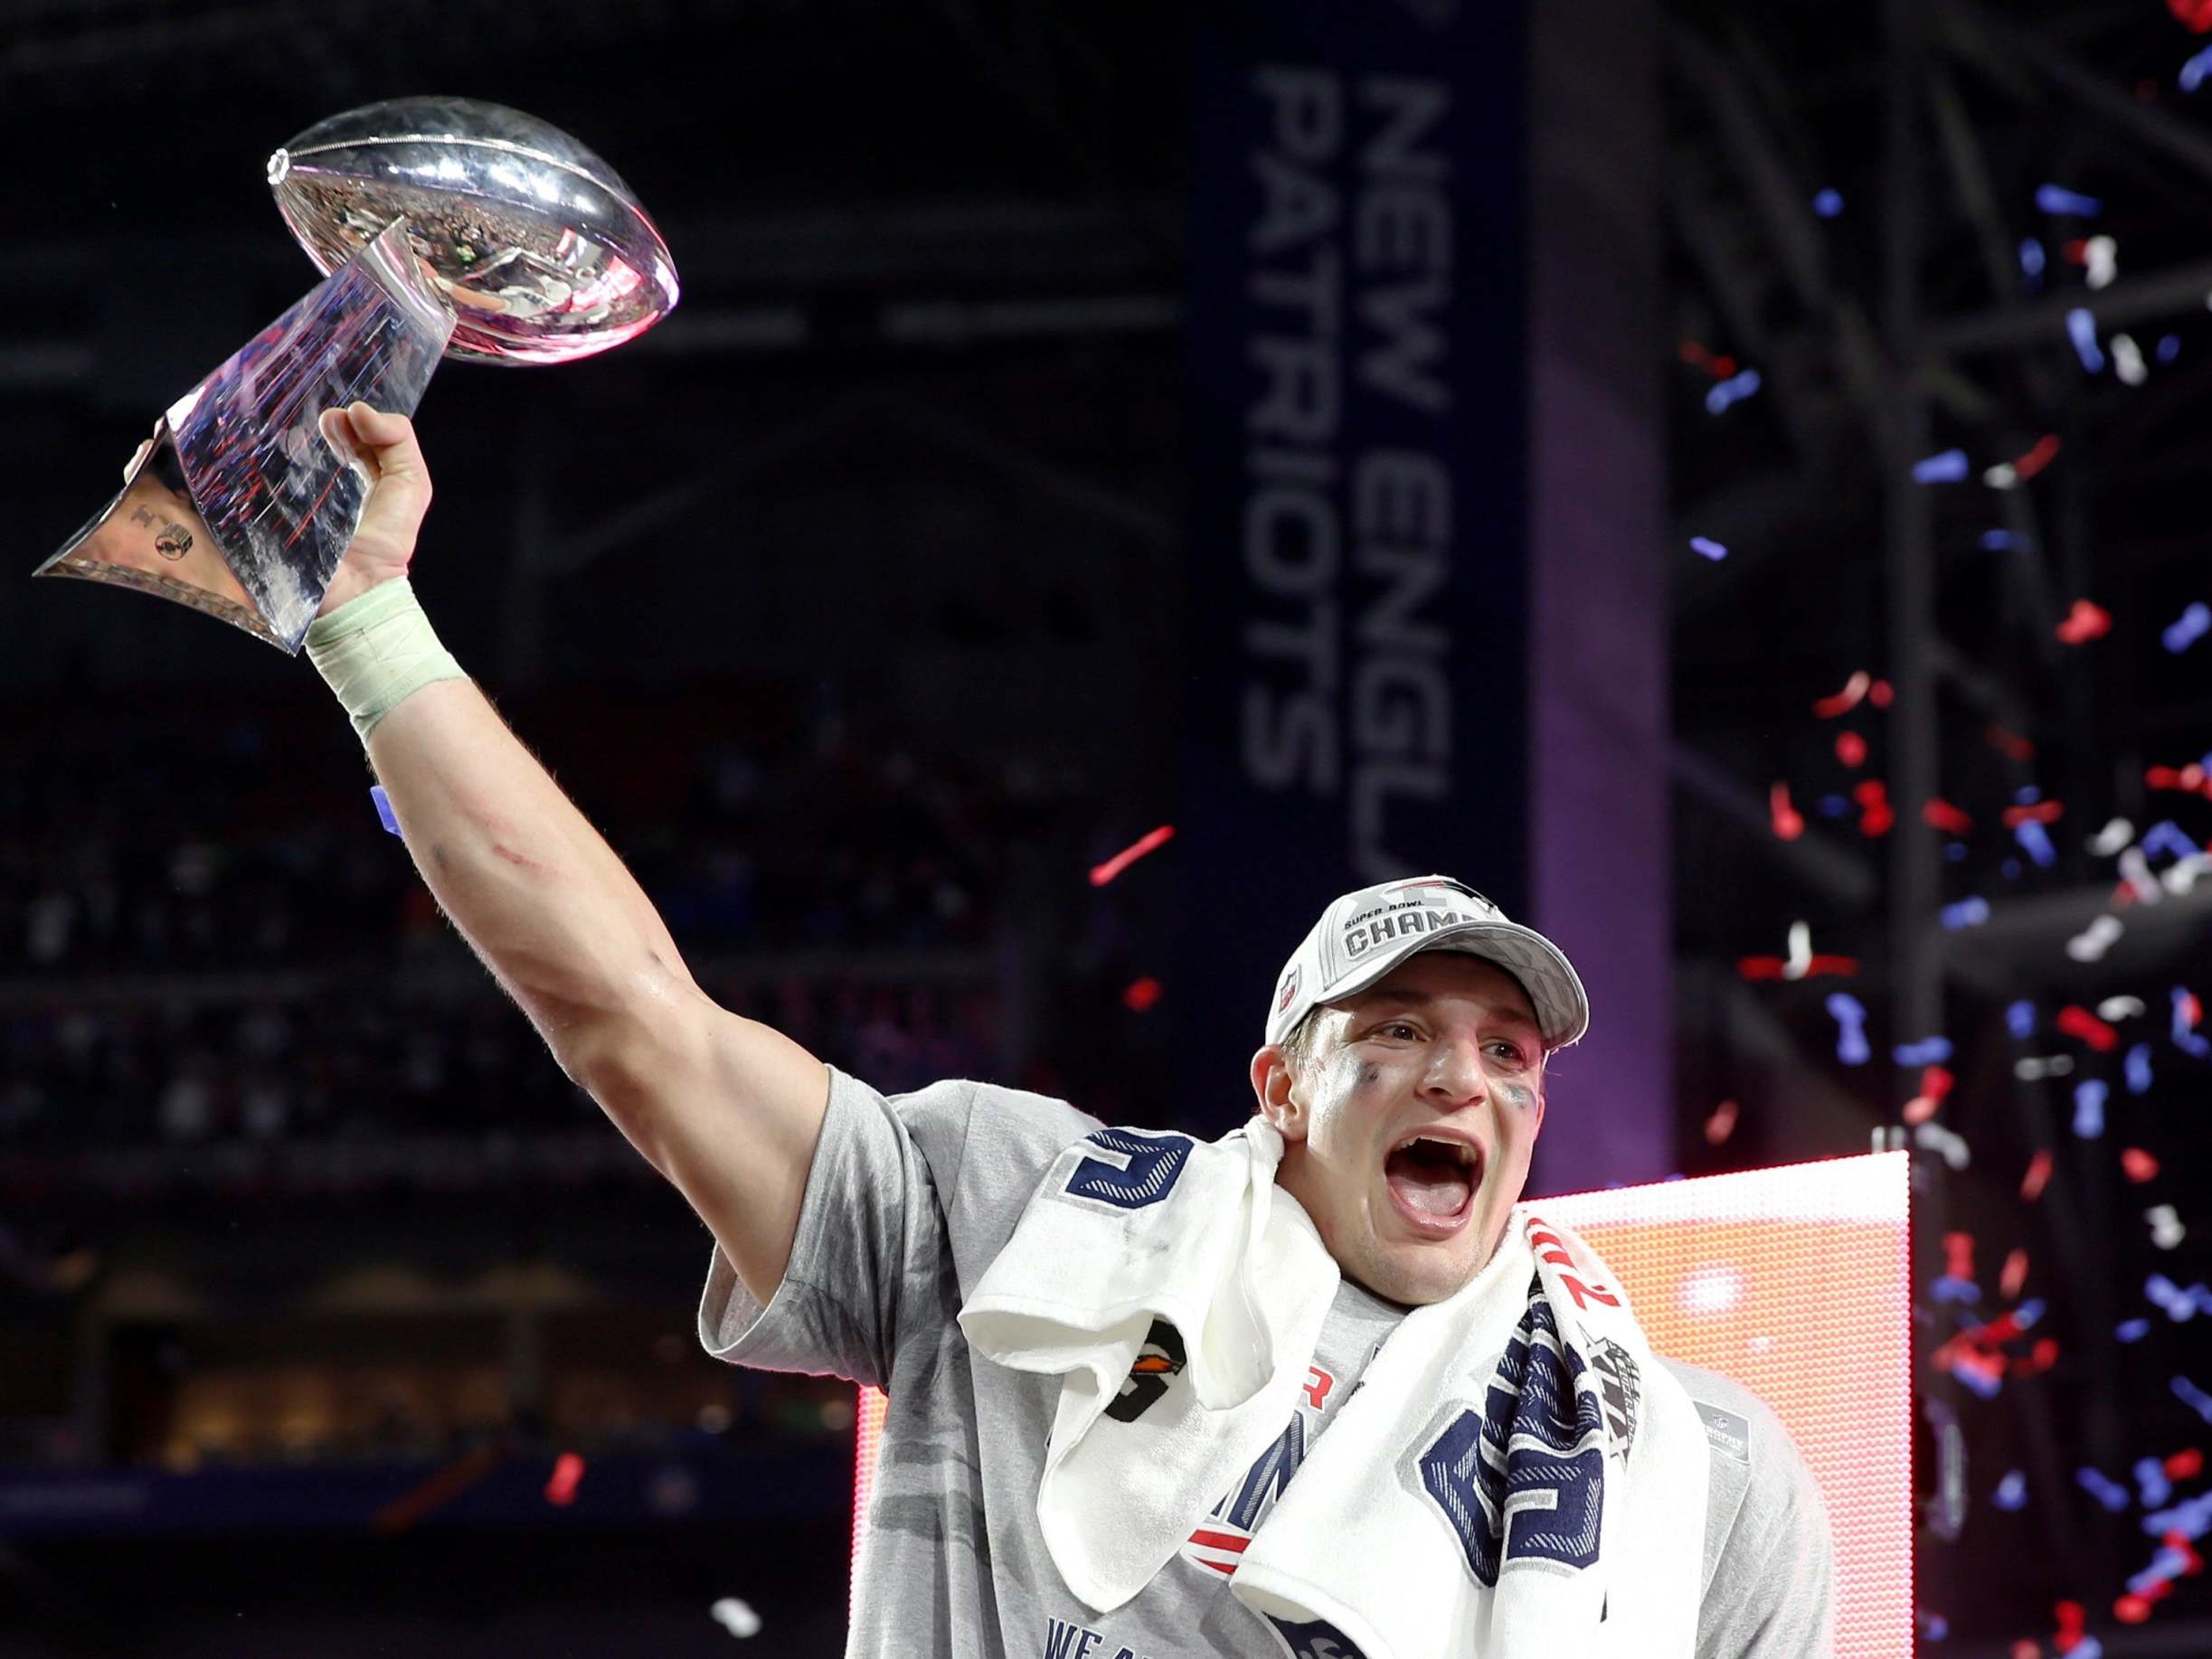 Rob Gronkowski has come out of retirement to join the Tampa Bay Buccaneers